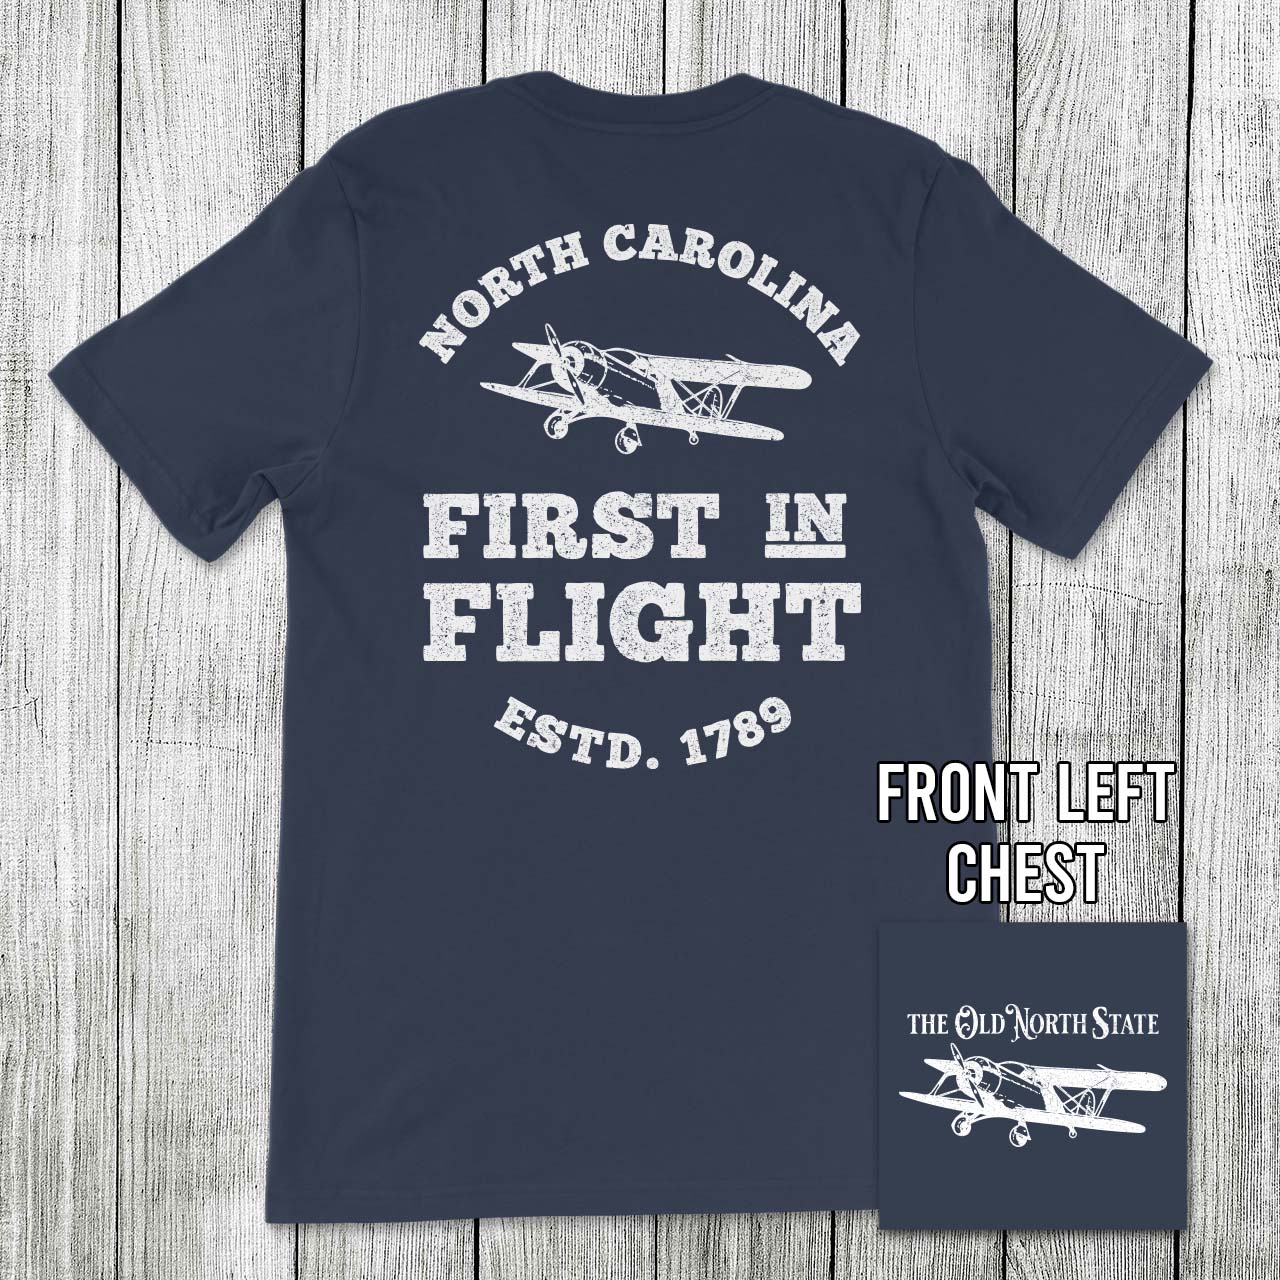 The Old North State - First in Flight